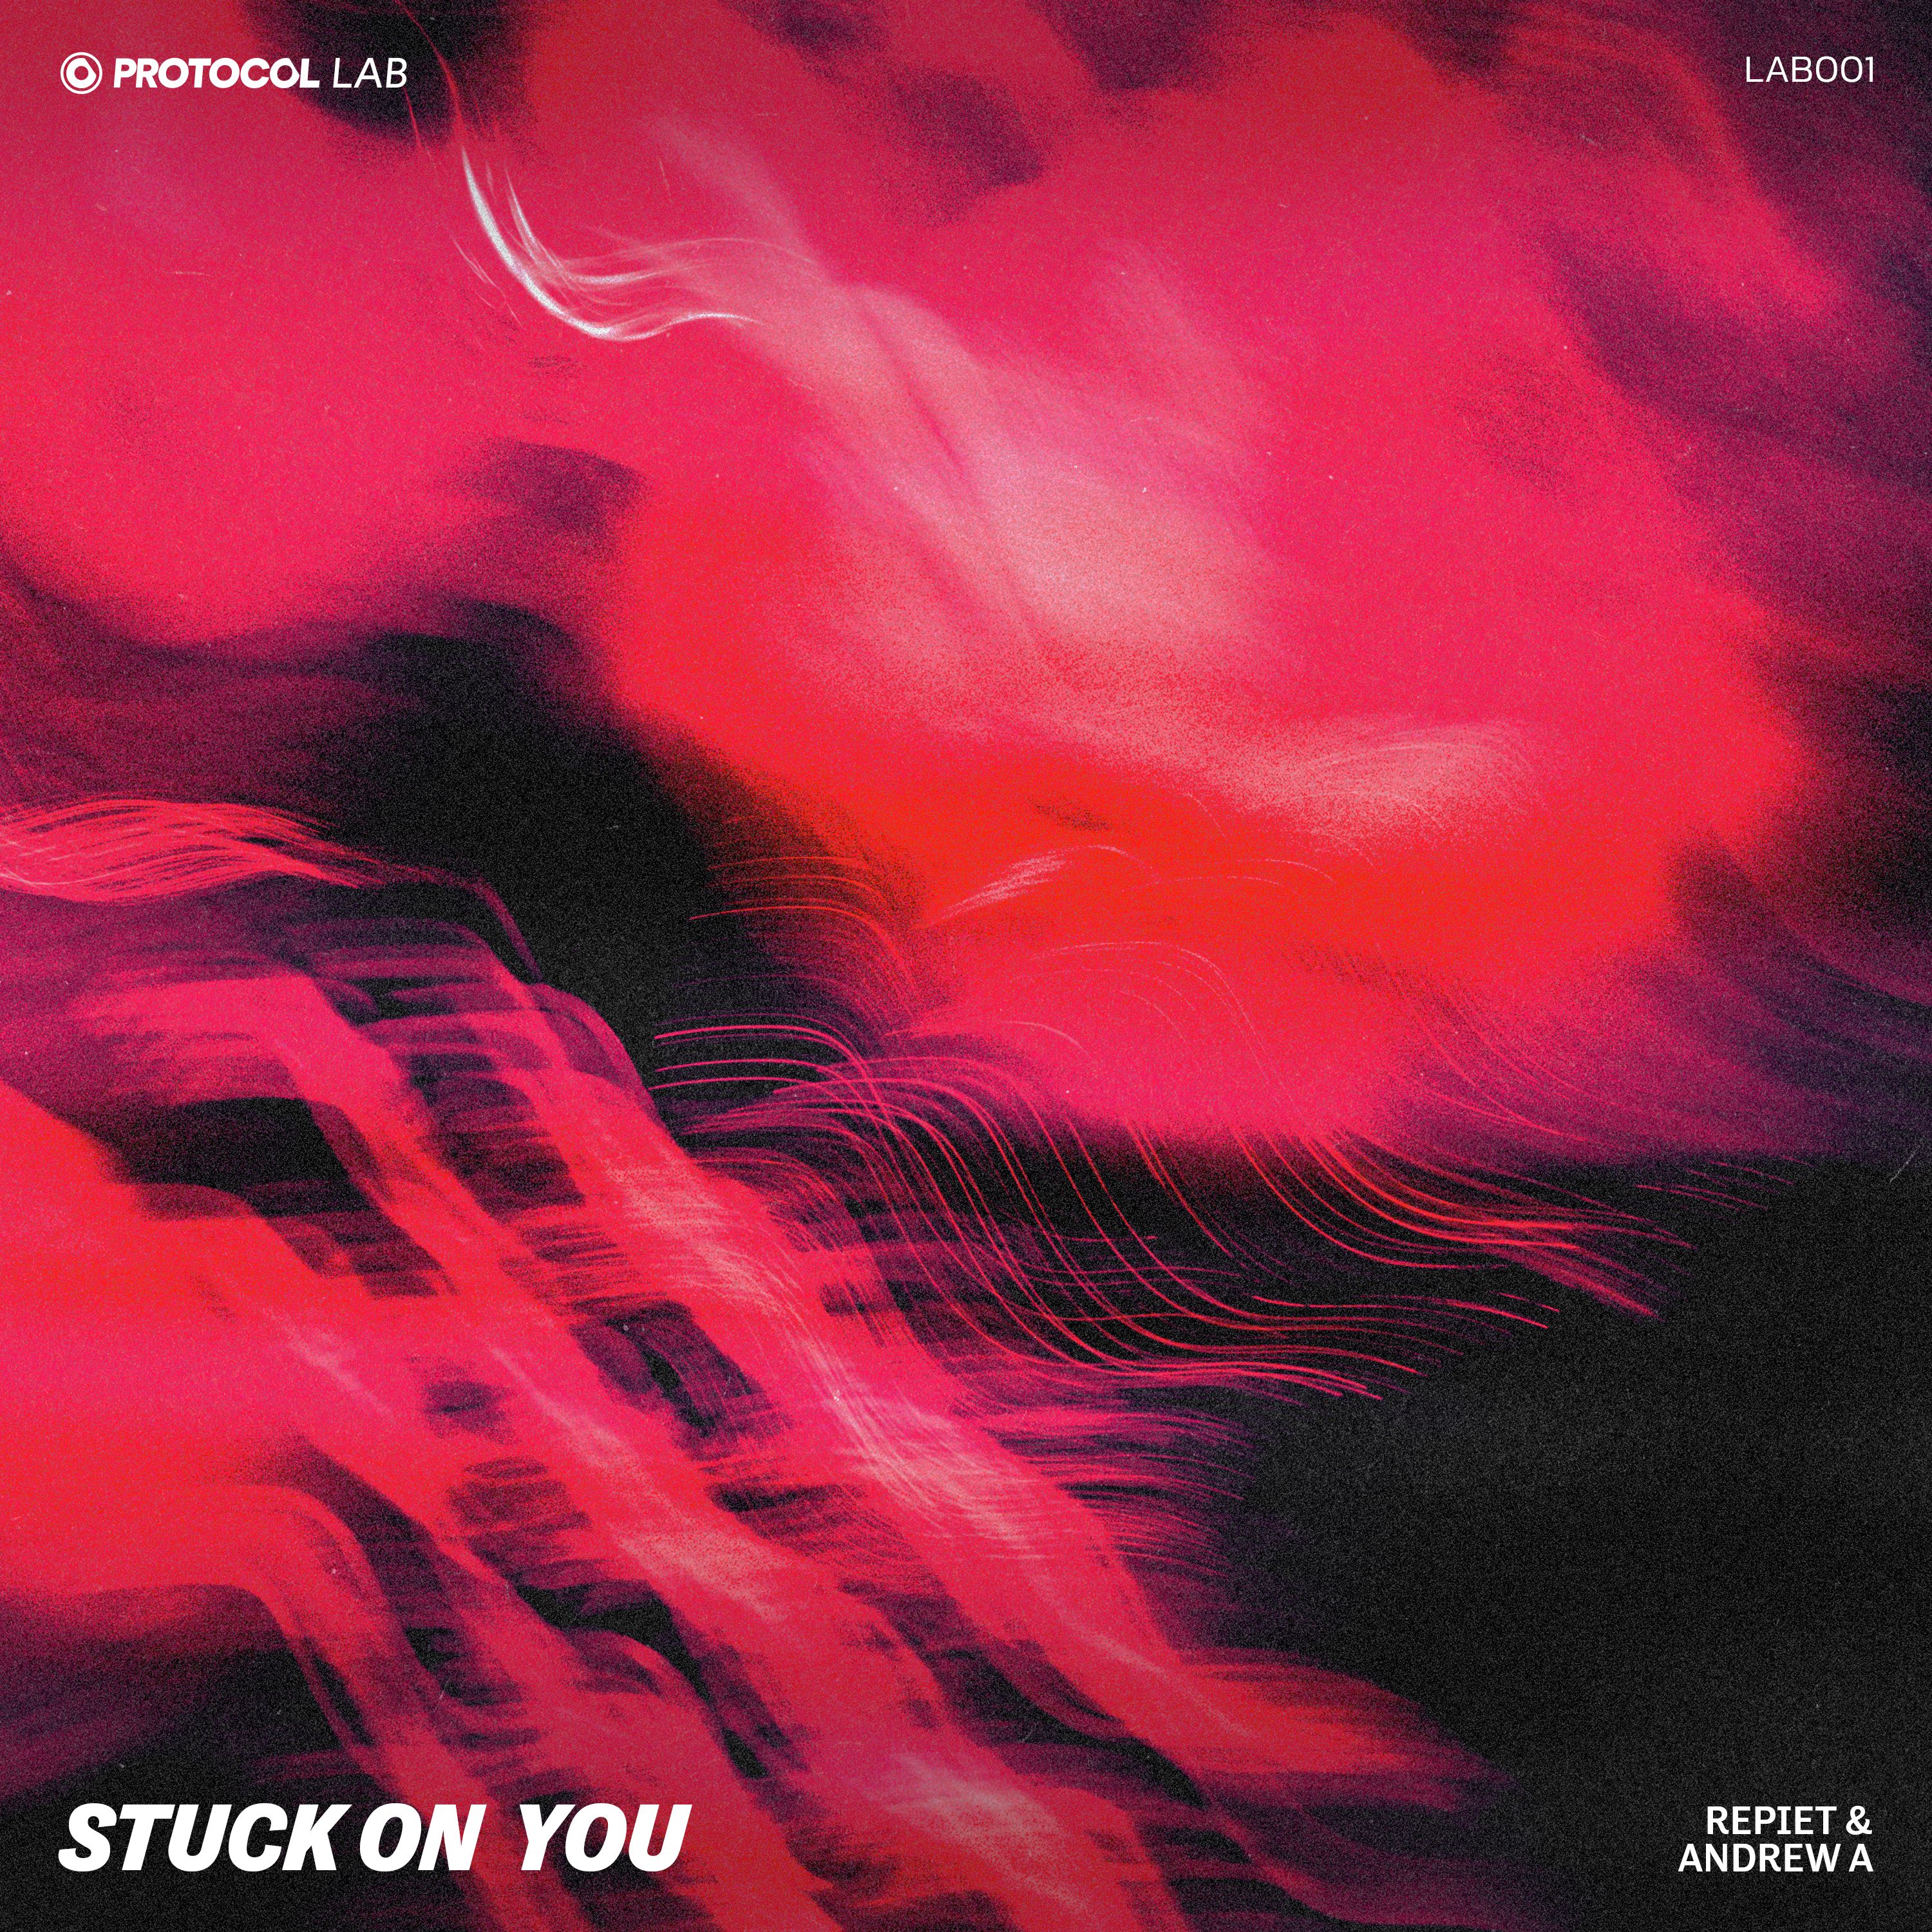  REPIET AND ANDREW A. “STUCK ON YOU” VIA PROTOCOL LAB